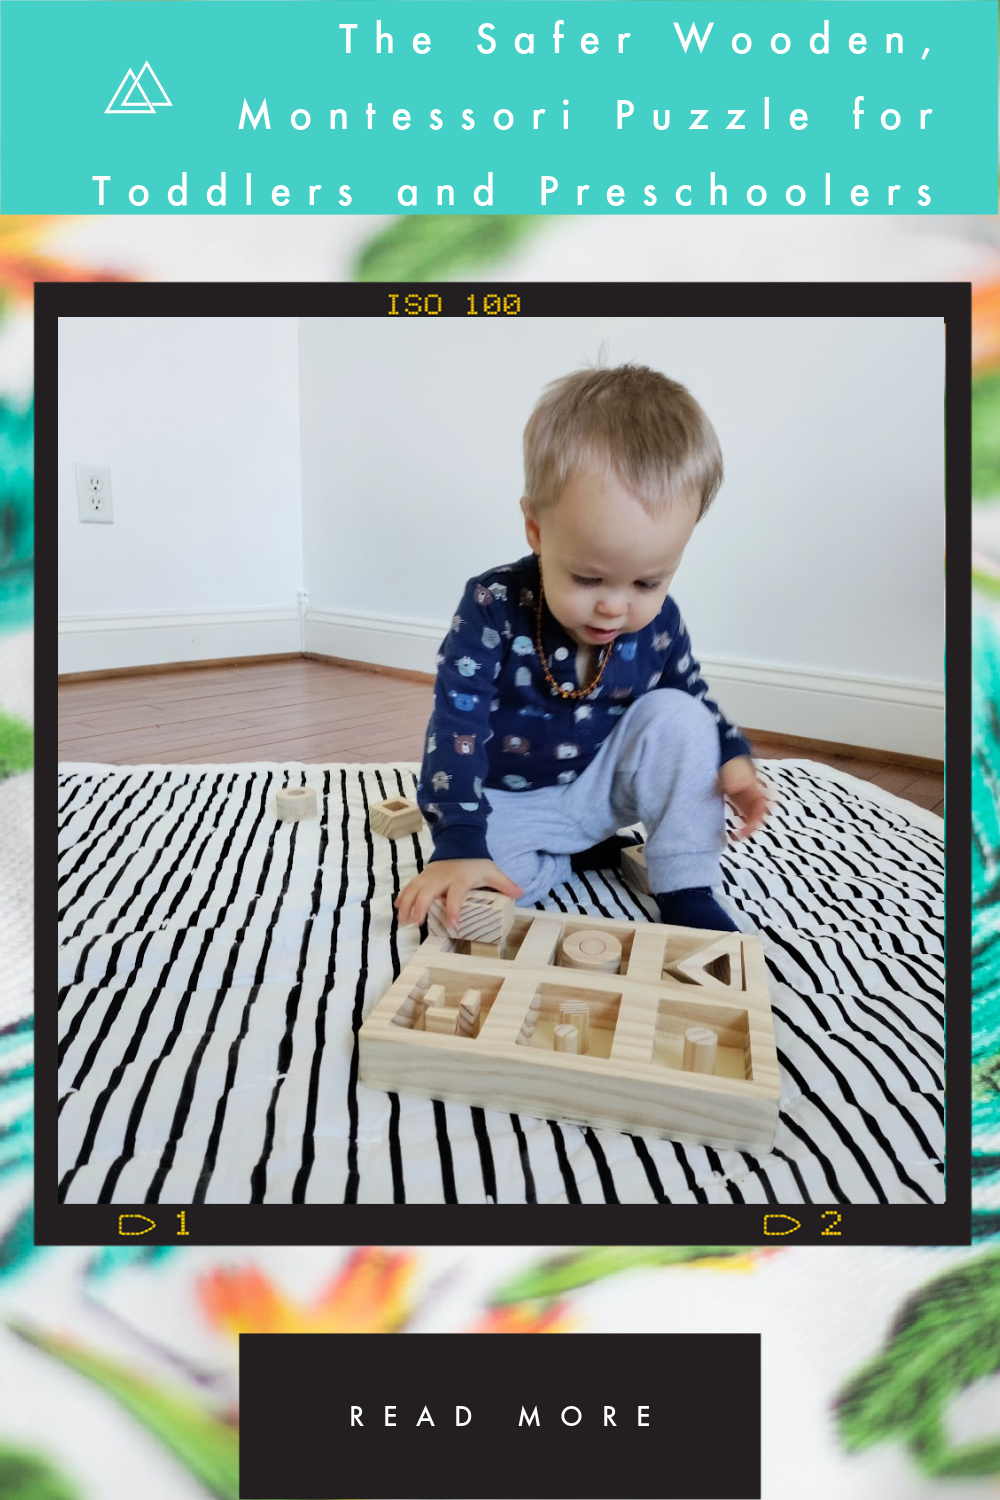 Dad's Brooklyn Deep Cutout Safe Puzzle Review - The Safer Wooden, Montessori Puzzle for Toddlers and Preschoolers